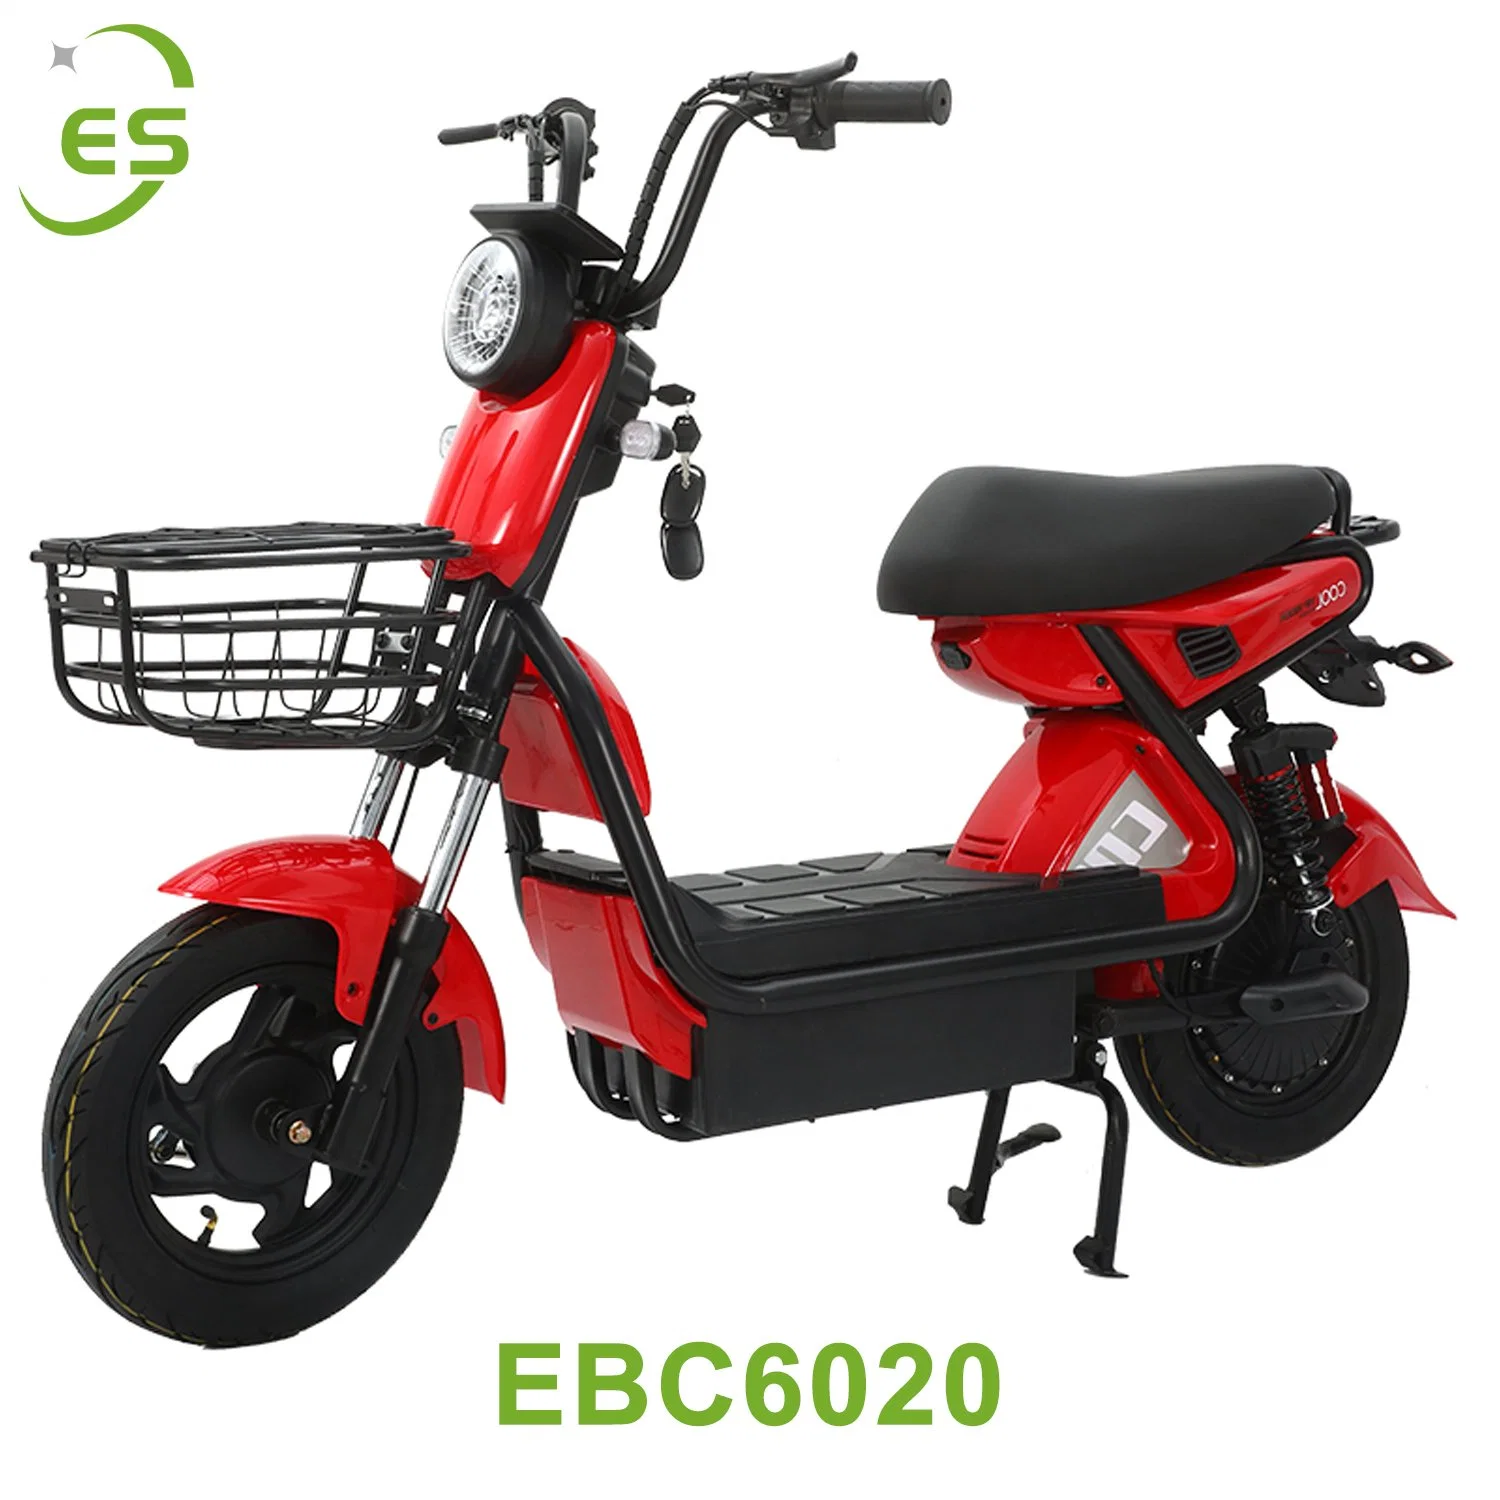 Ebc6020 China Factory Produces Electric Motorcycle Can Be Customized to Produce New Electric Scooter Sell